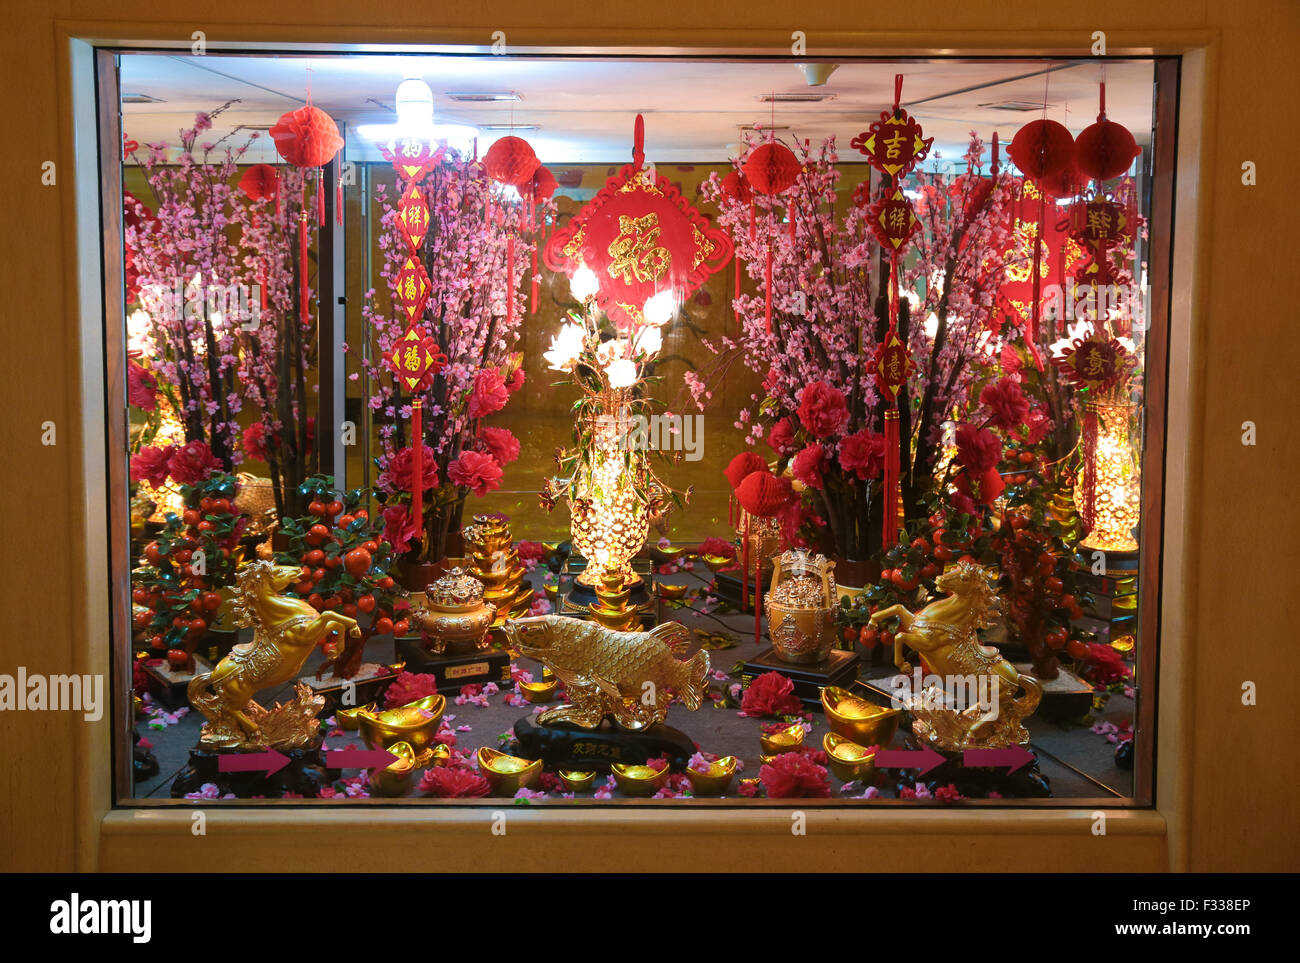 Chinese New Year decoration in a window display at Genting Highland ...